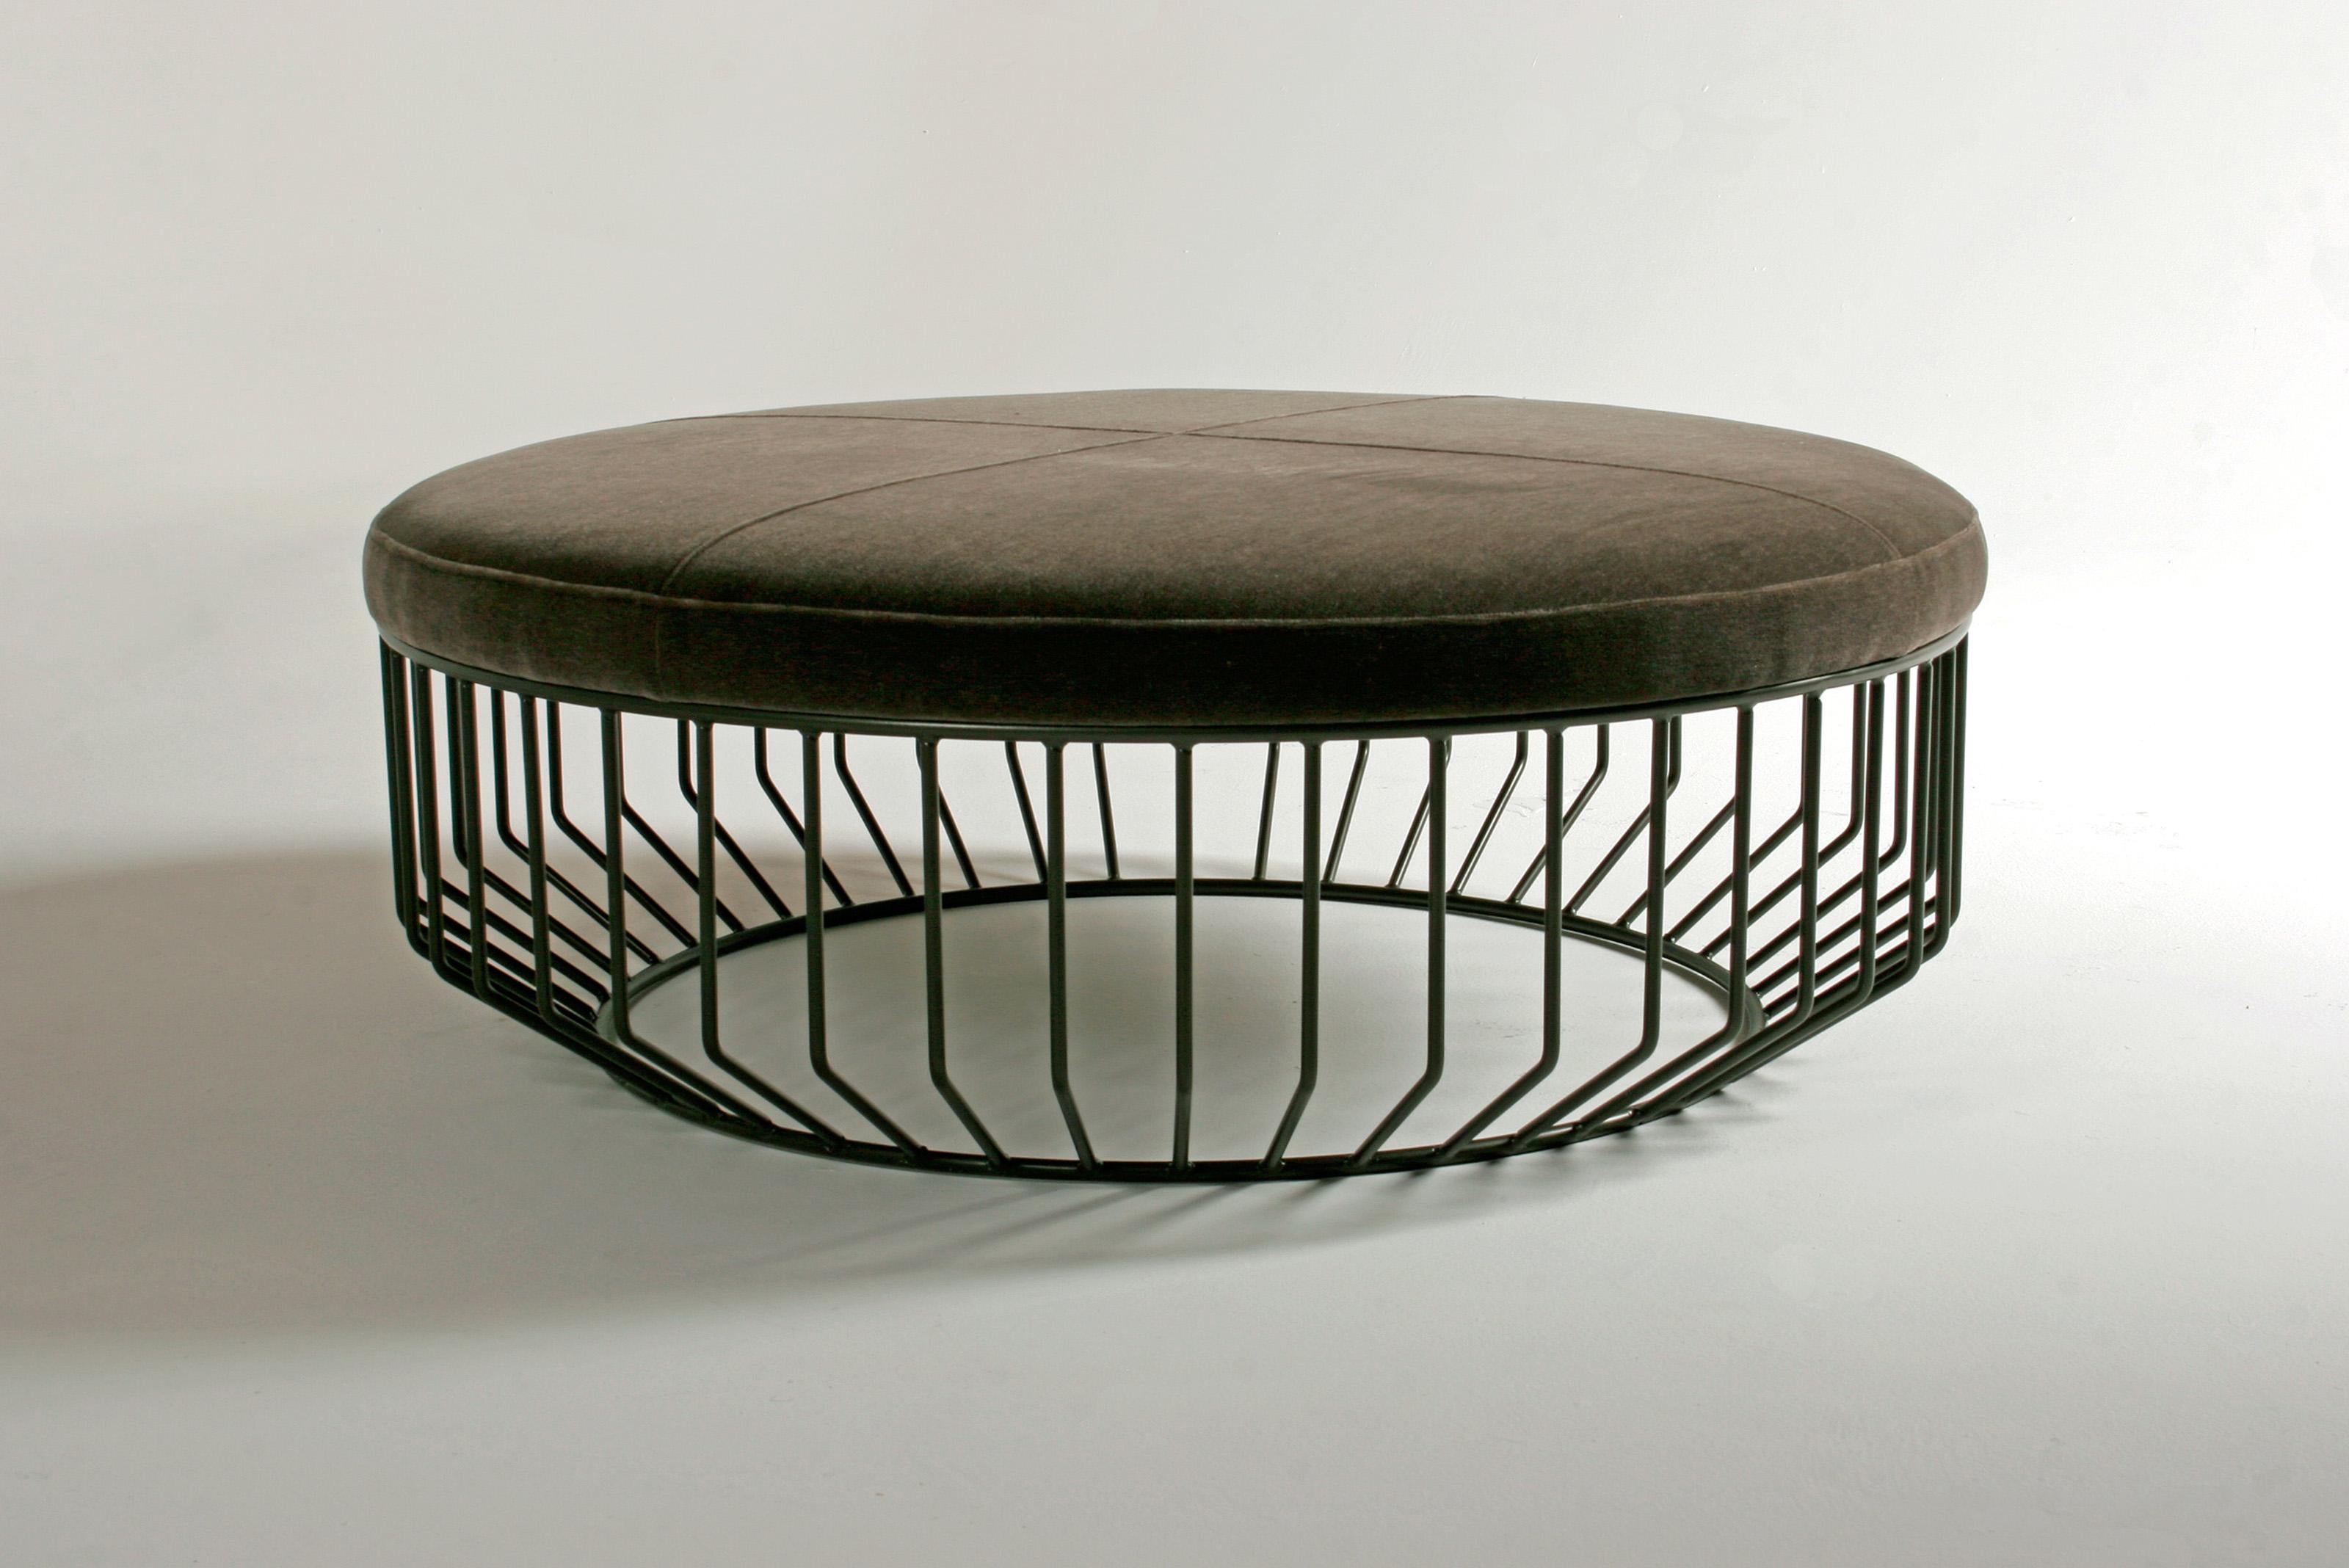 Wired Large Ottoman by Phase Design
Dimensions: Ø 106.7 x H 35.6 cm. 
Materials: Powder-coated metal and upholstery.

Solid steel bar with upholstered tops. Steel available in gloss or flat black and white, polished chrome, burnt copper, or smoked